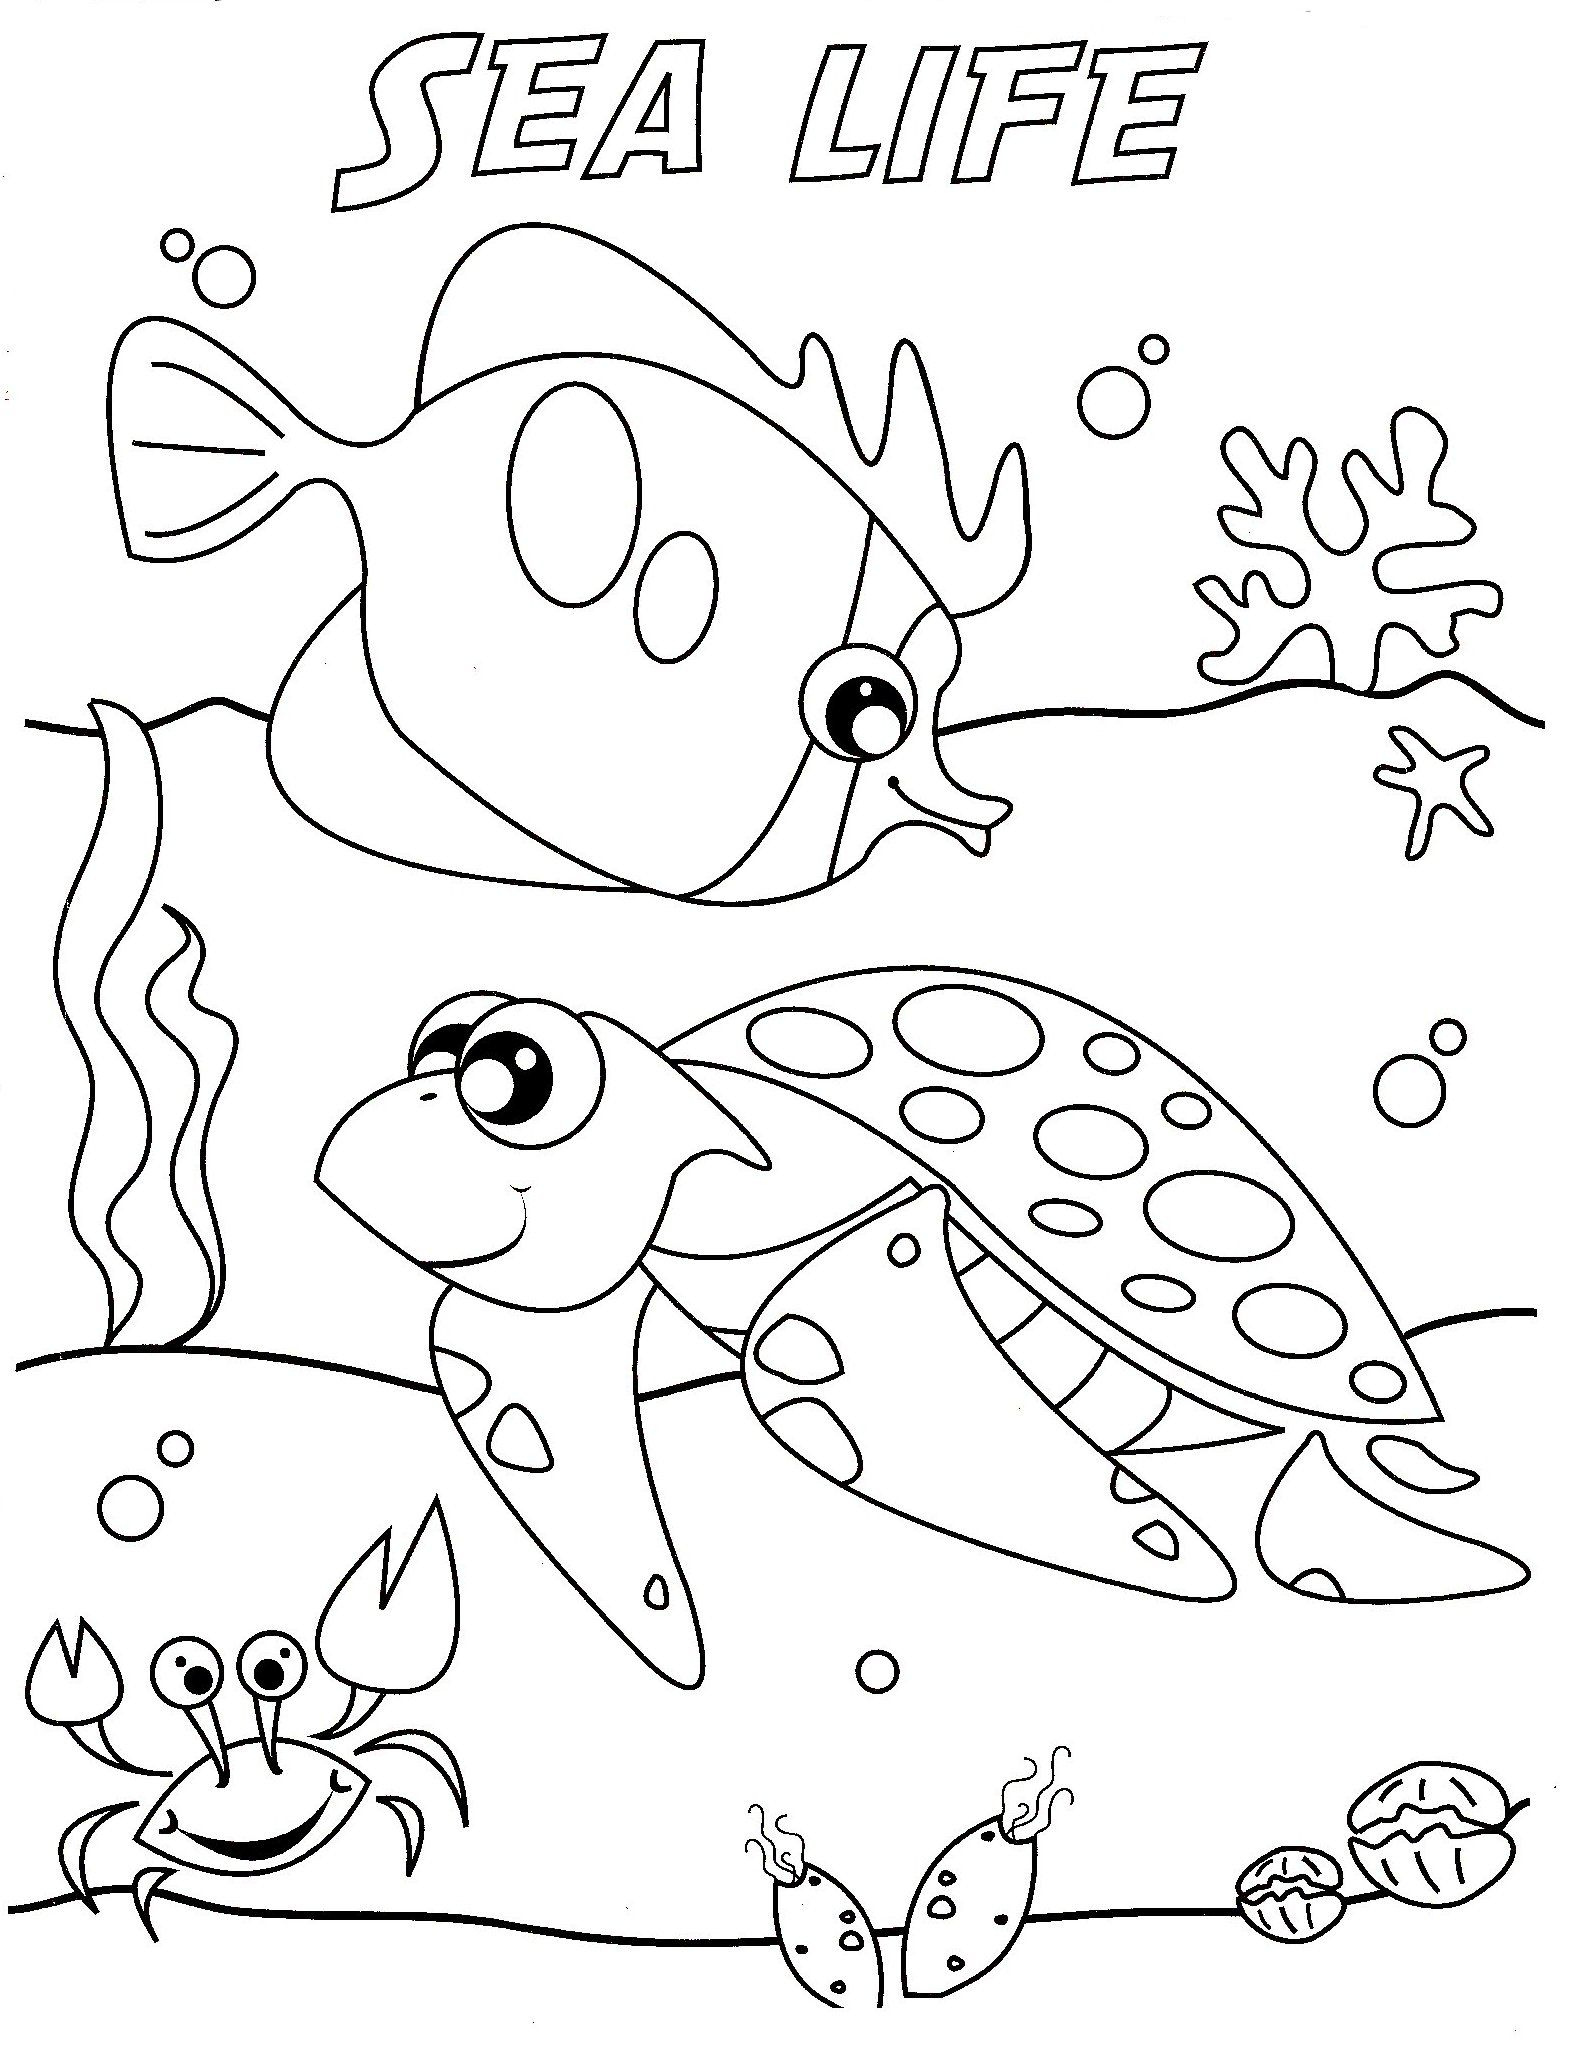 ocean-life-coloring-pages-to-download-and-print-for-free-ocean